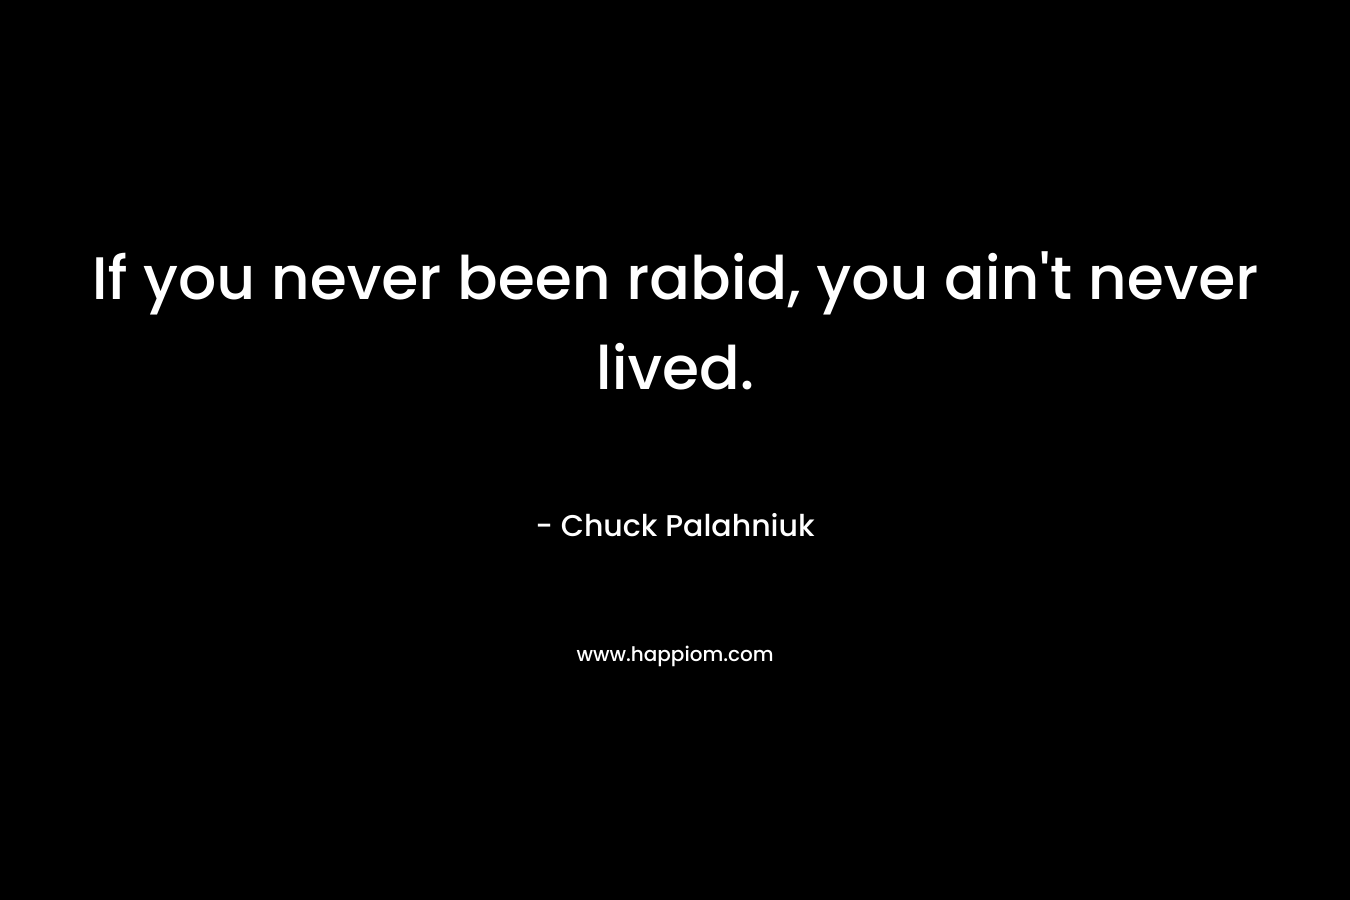 If you never been rabid, you ain't never lived.